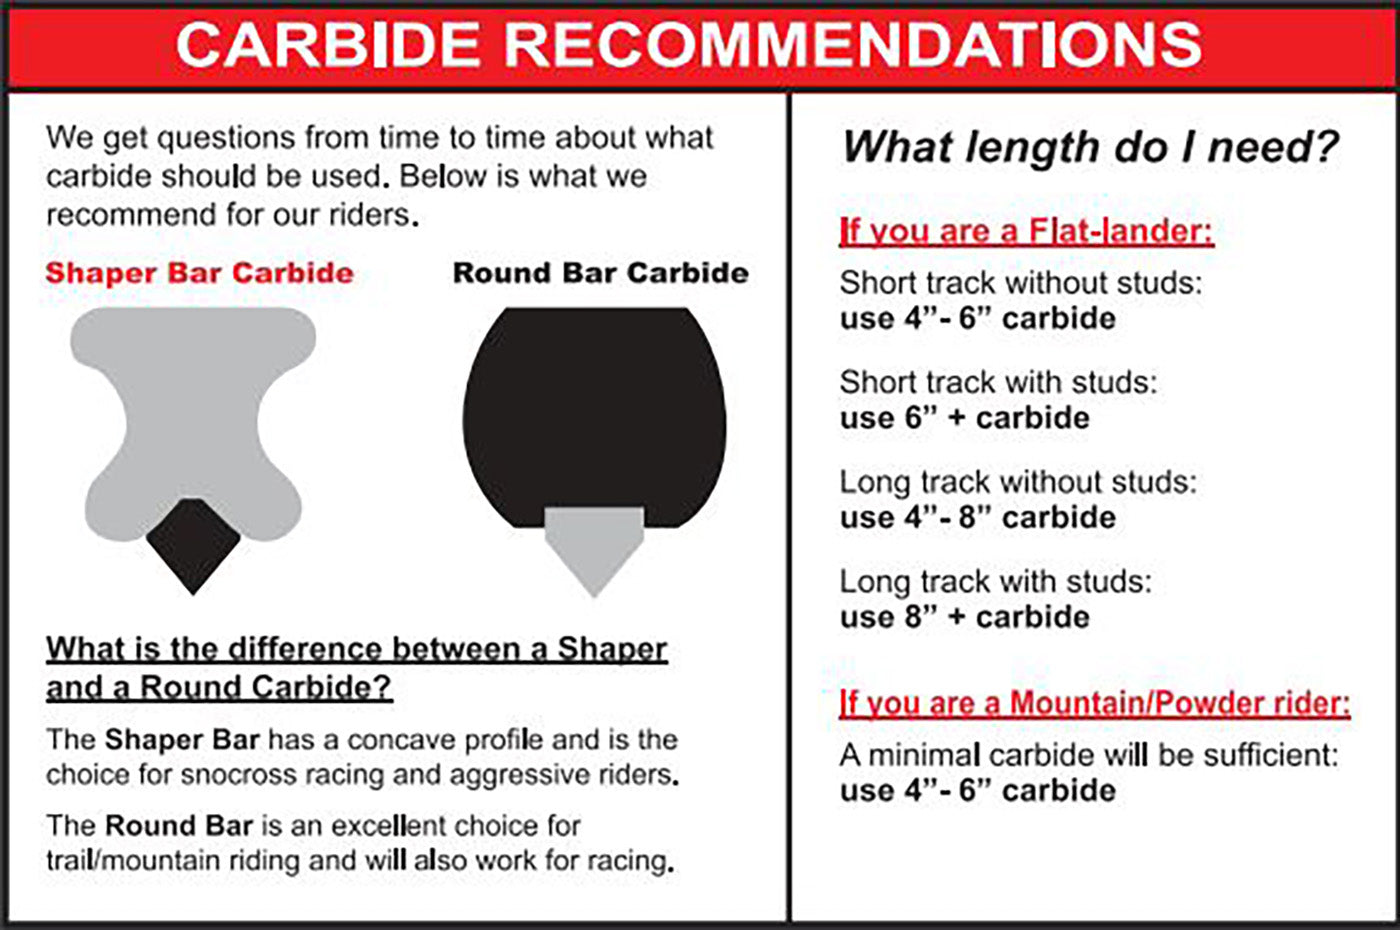 An informative guide to carbide recommendations depending on the length needed and the difference between a Shaper and a Round Carbide